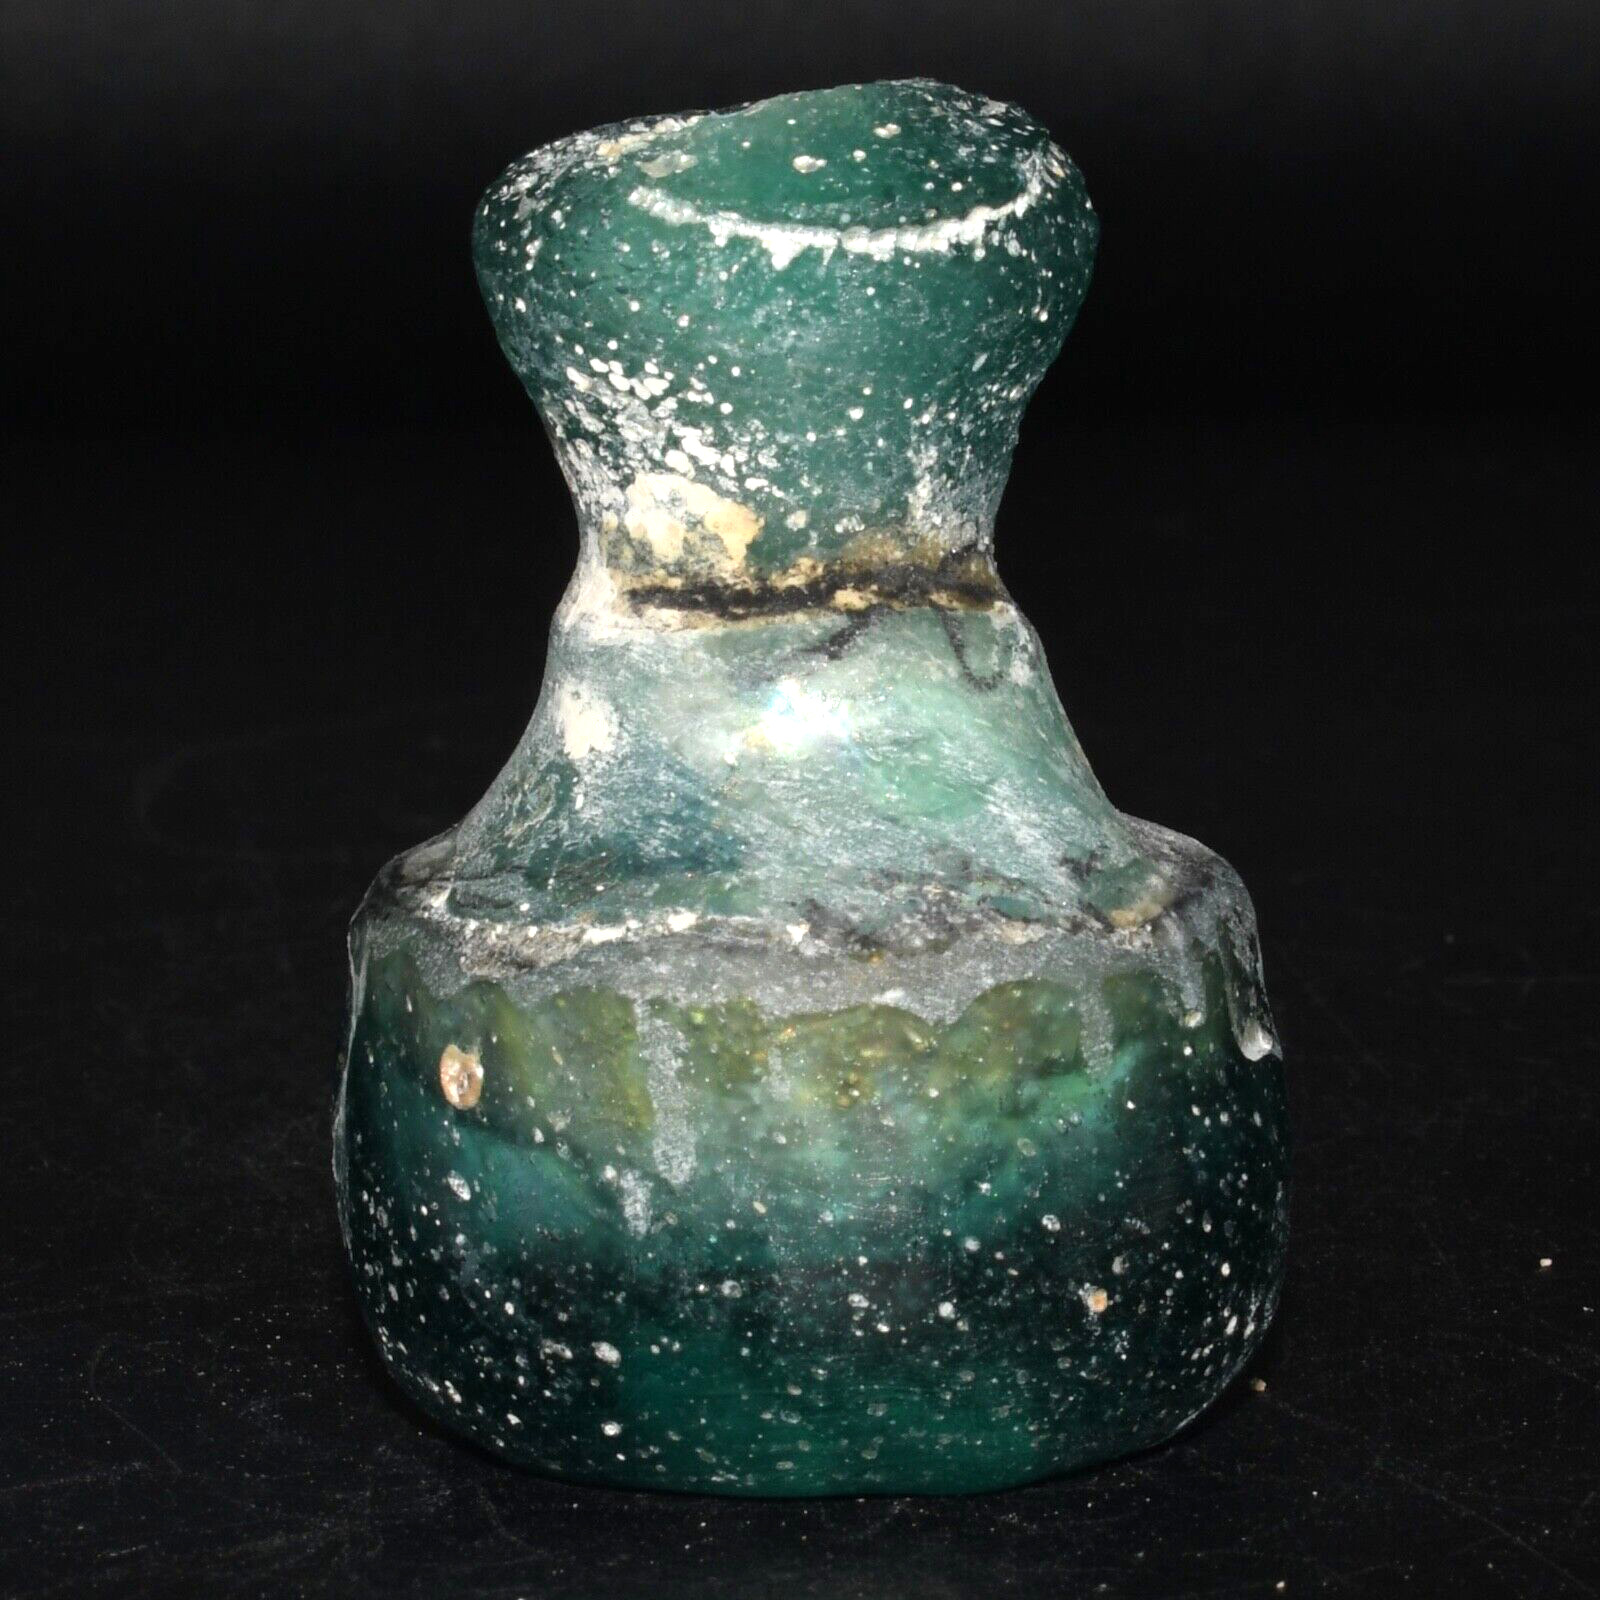 Authentic Ancient Early Roman Glass Bottle Vial Circa 1st - 2nd Century AD